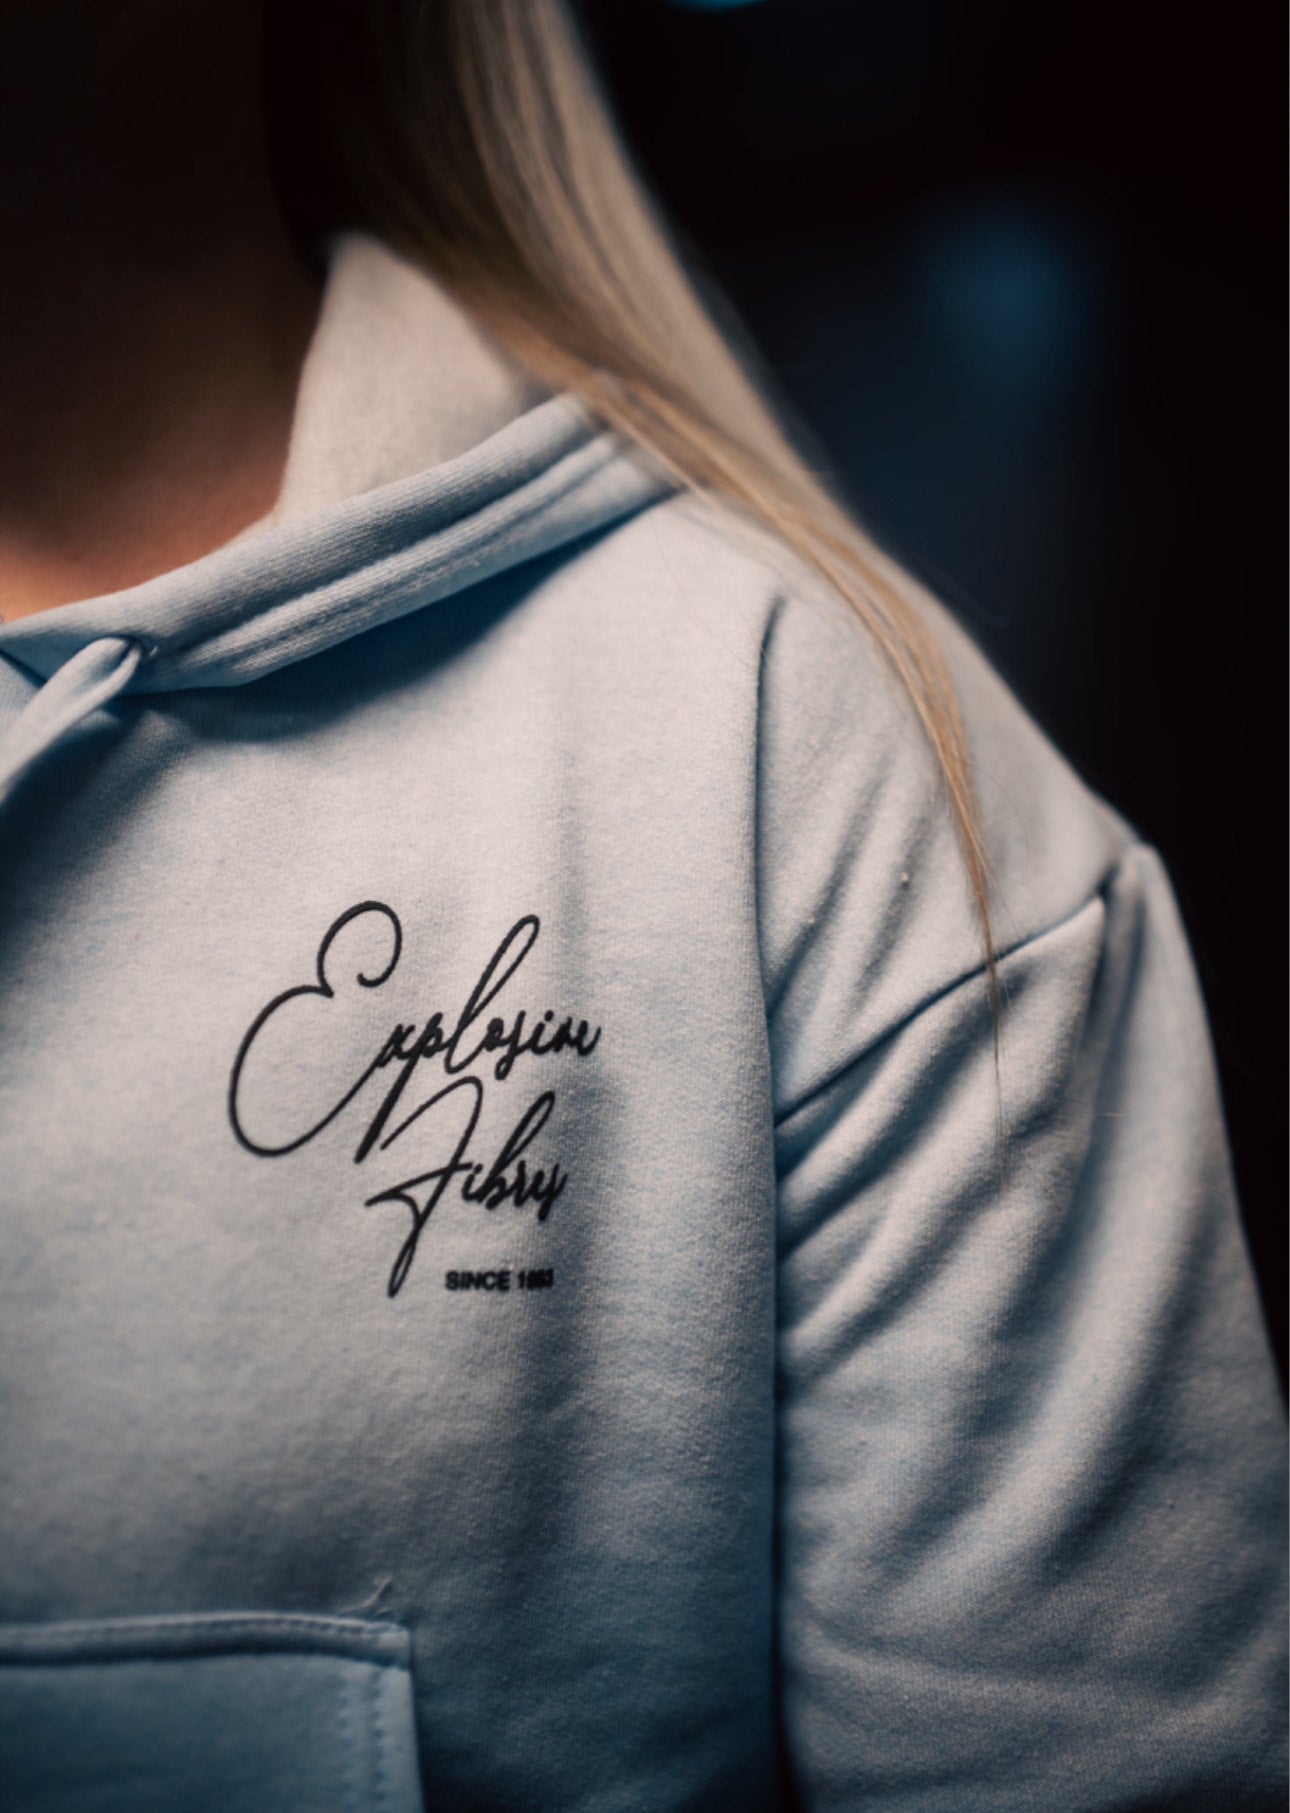 "Since The Dawn Of Time" Ladies Crop Sweat - Sky